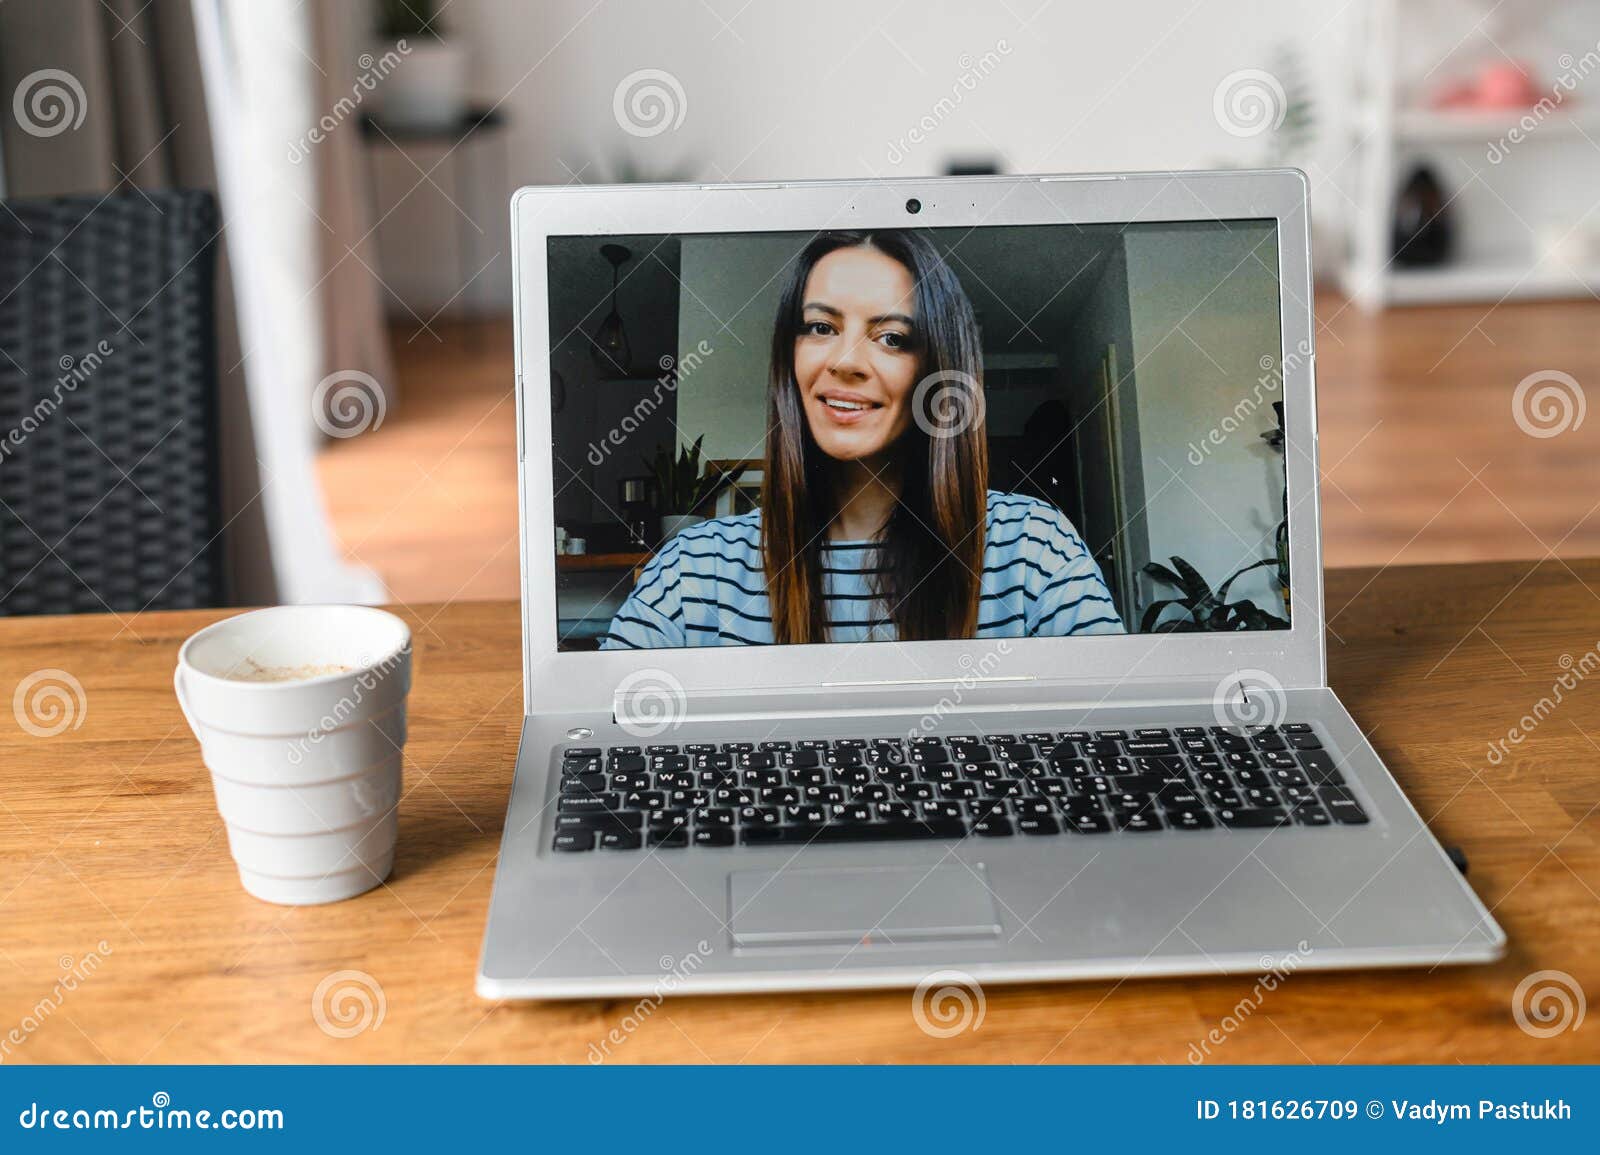 Ultimate Best Position For Laptop For Zoom Meetings in Bedroom